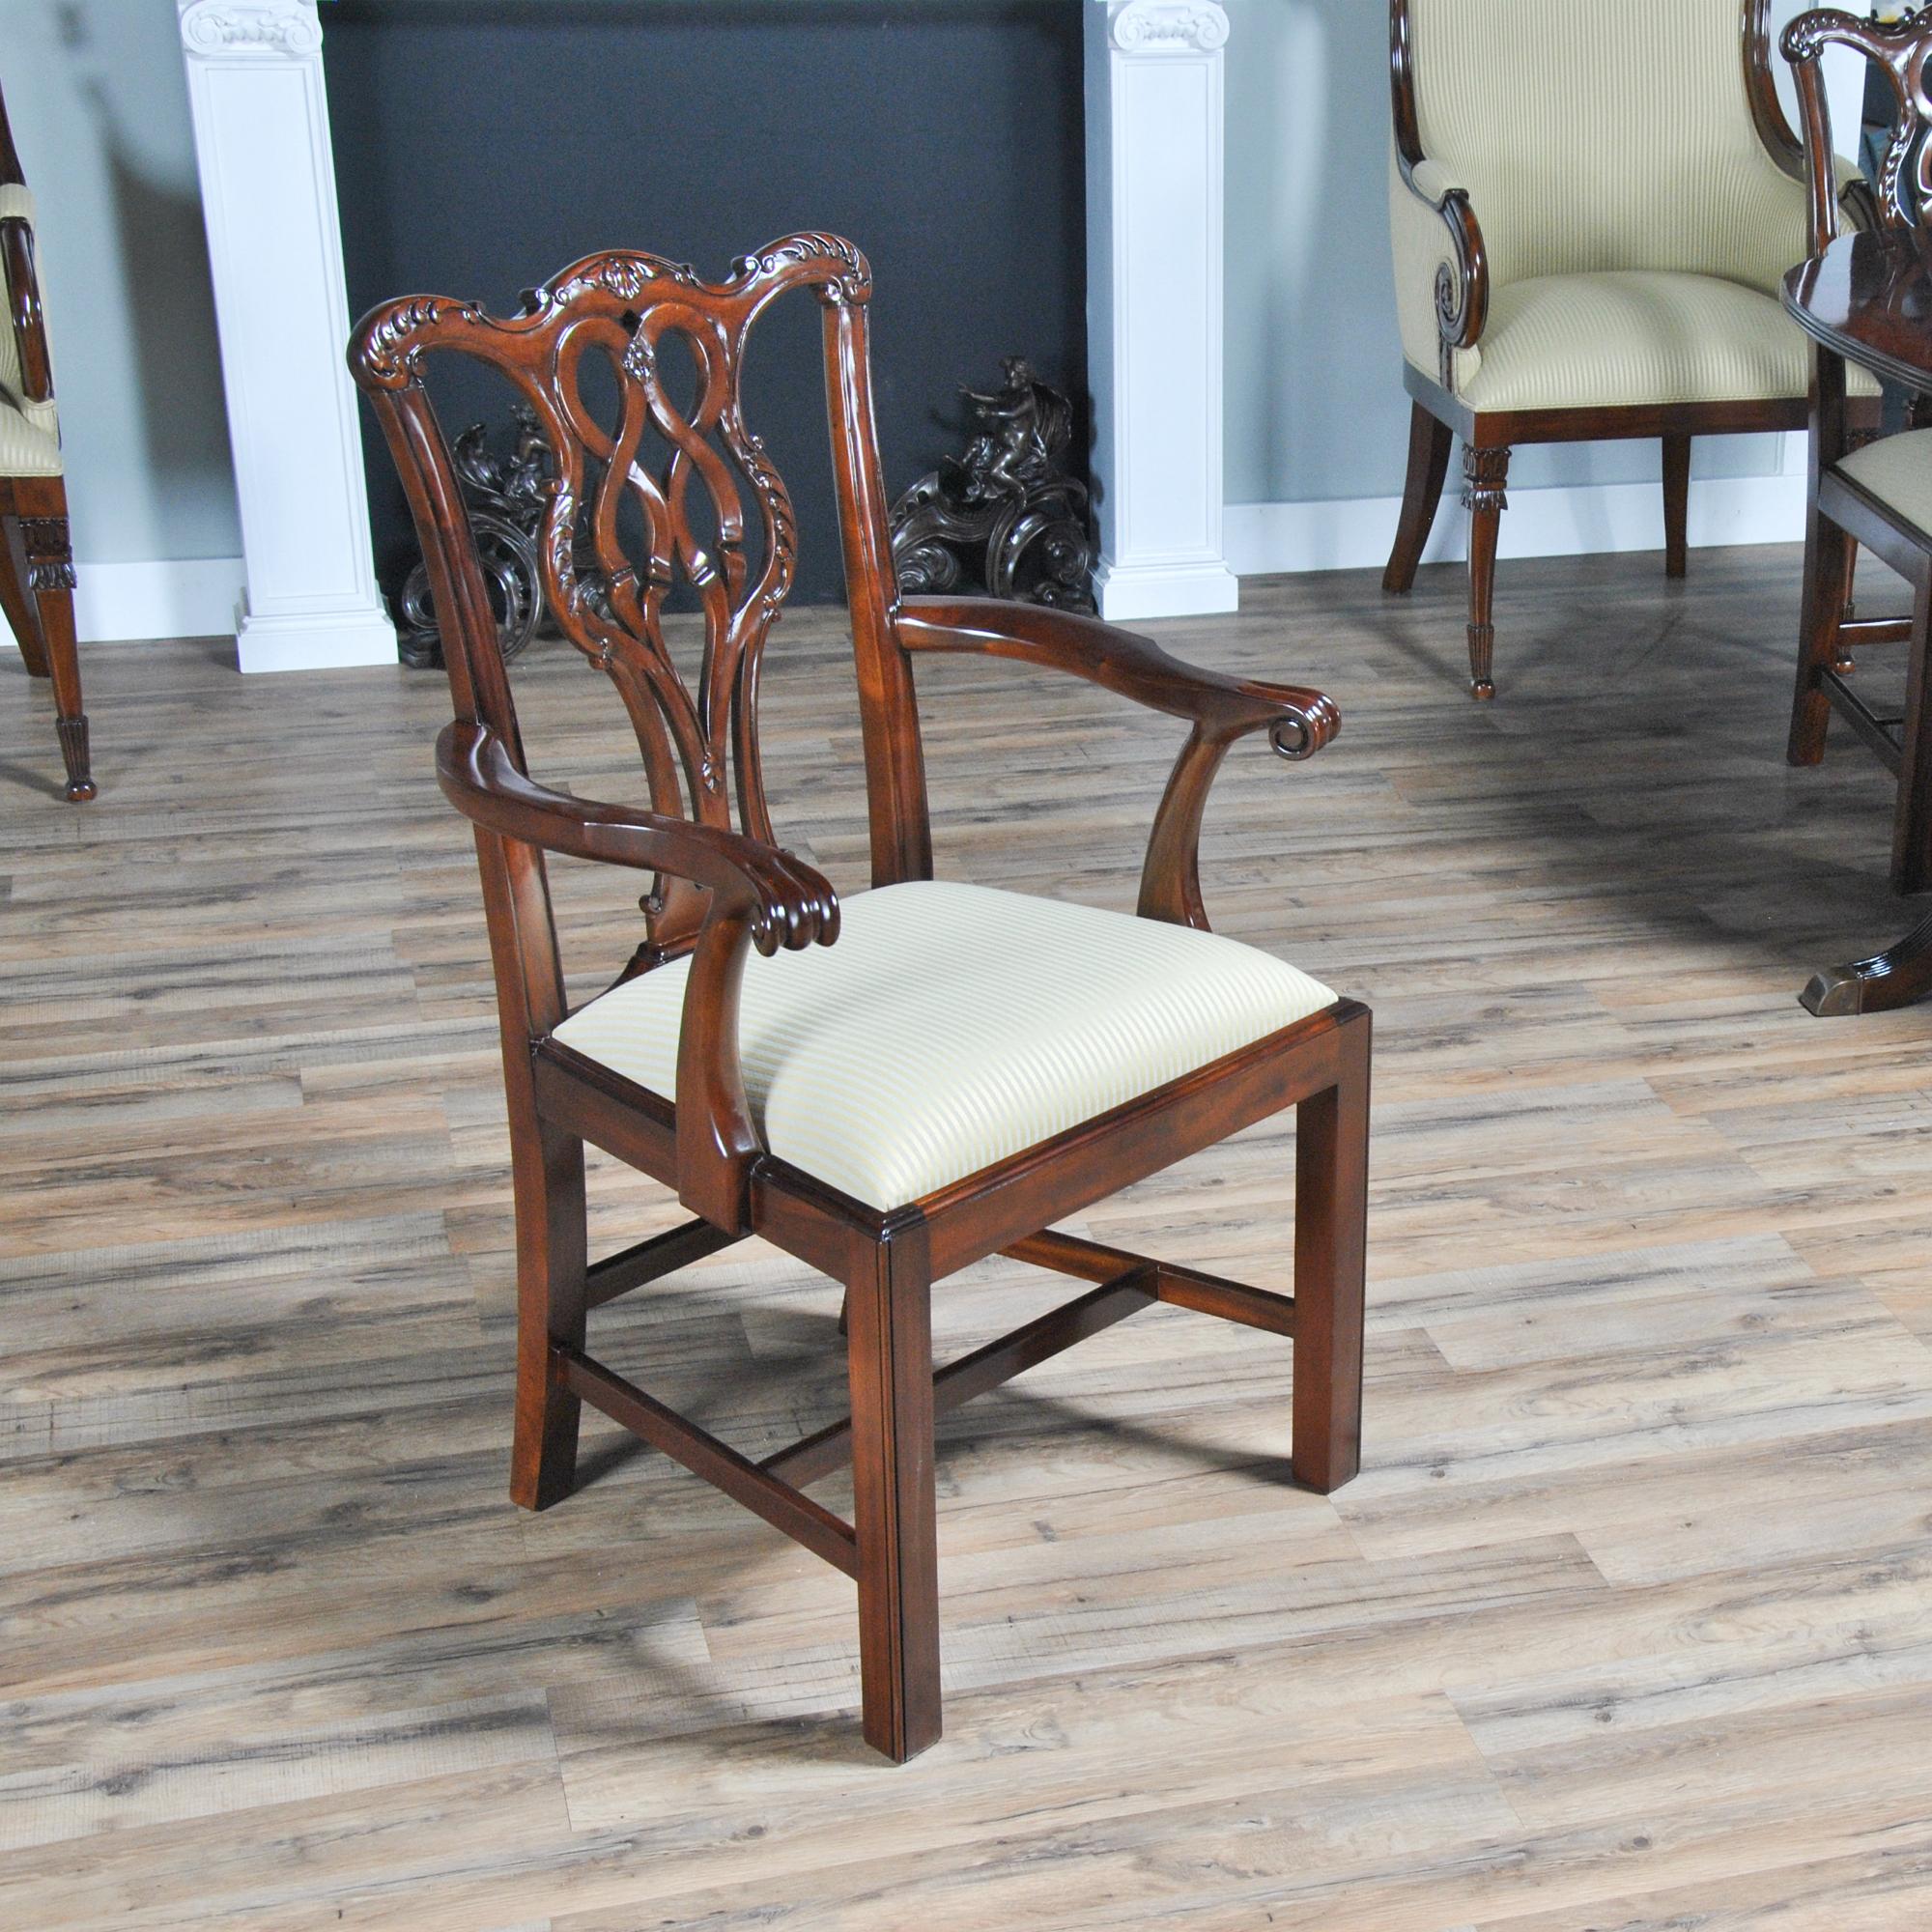 A hand carved, solid mahogany set of 10 solid Mahogany Chippendale Chairs with 2 arm chairs and 8 side chairs. Each chair has a serpentine crest rail and similar back splat, all hand carved from solid mahogany. The armchair features scrolled and